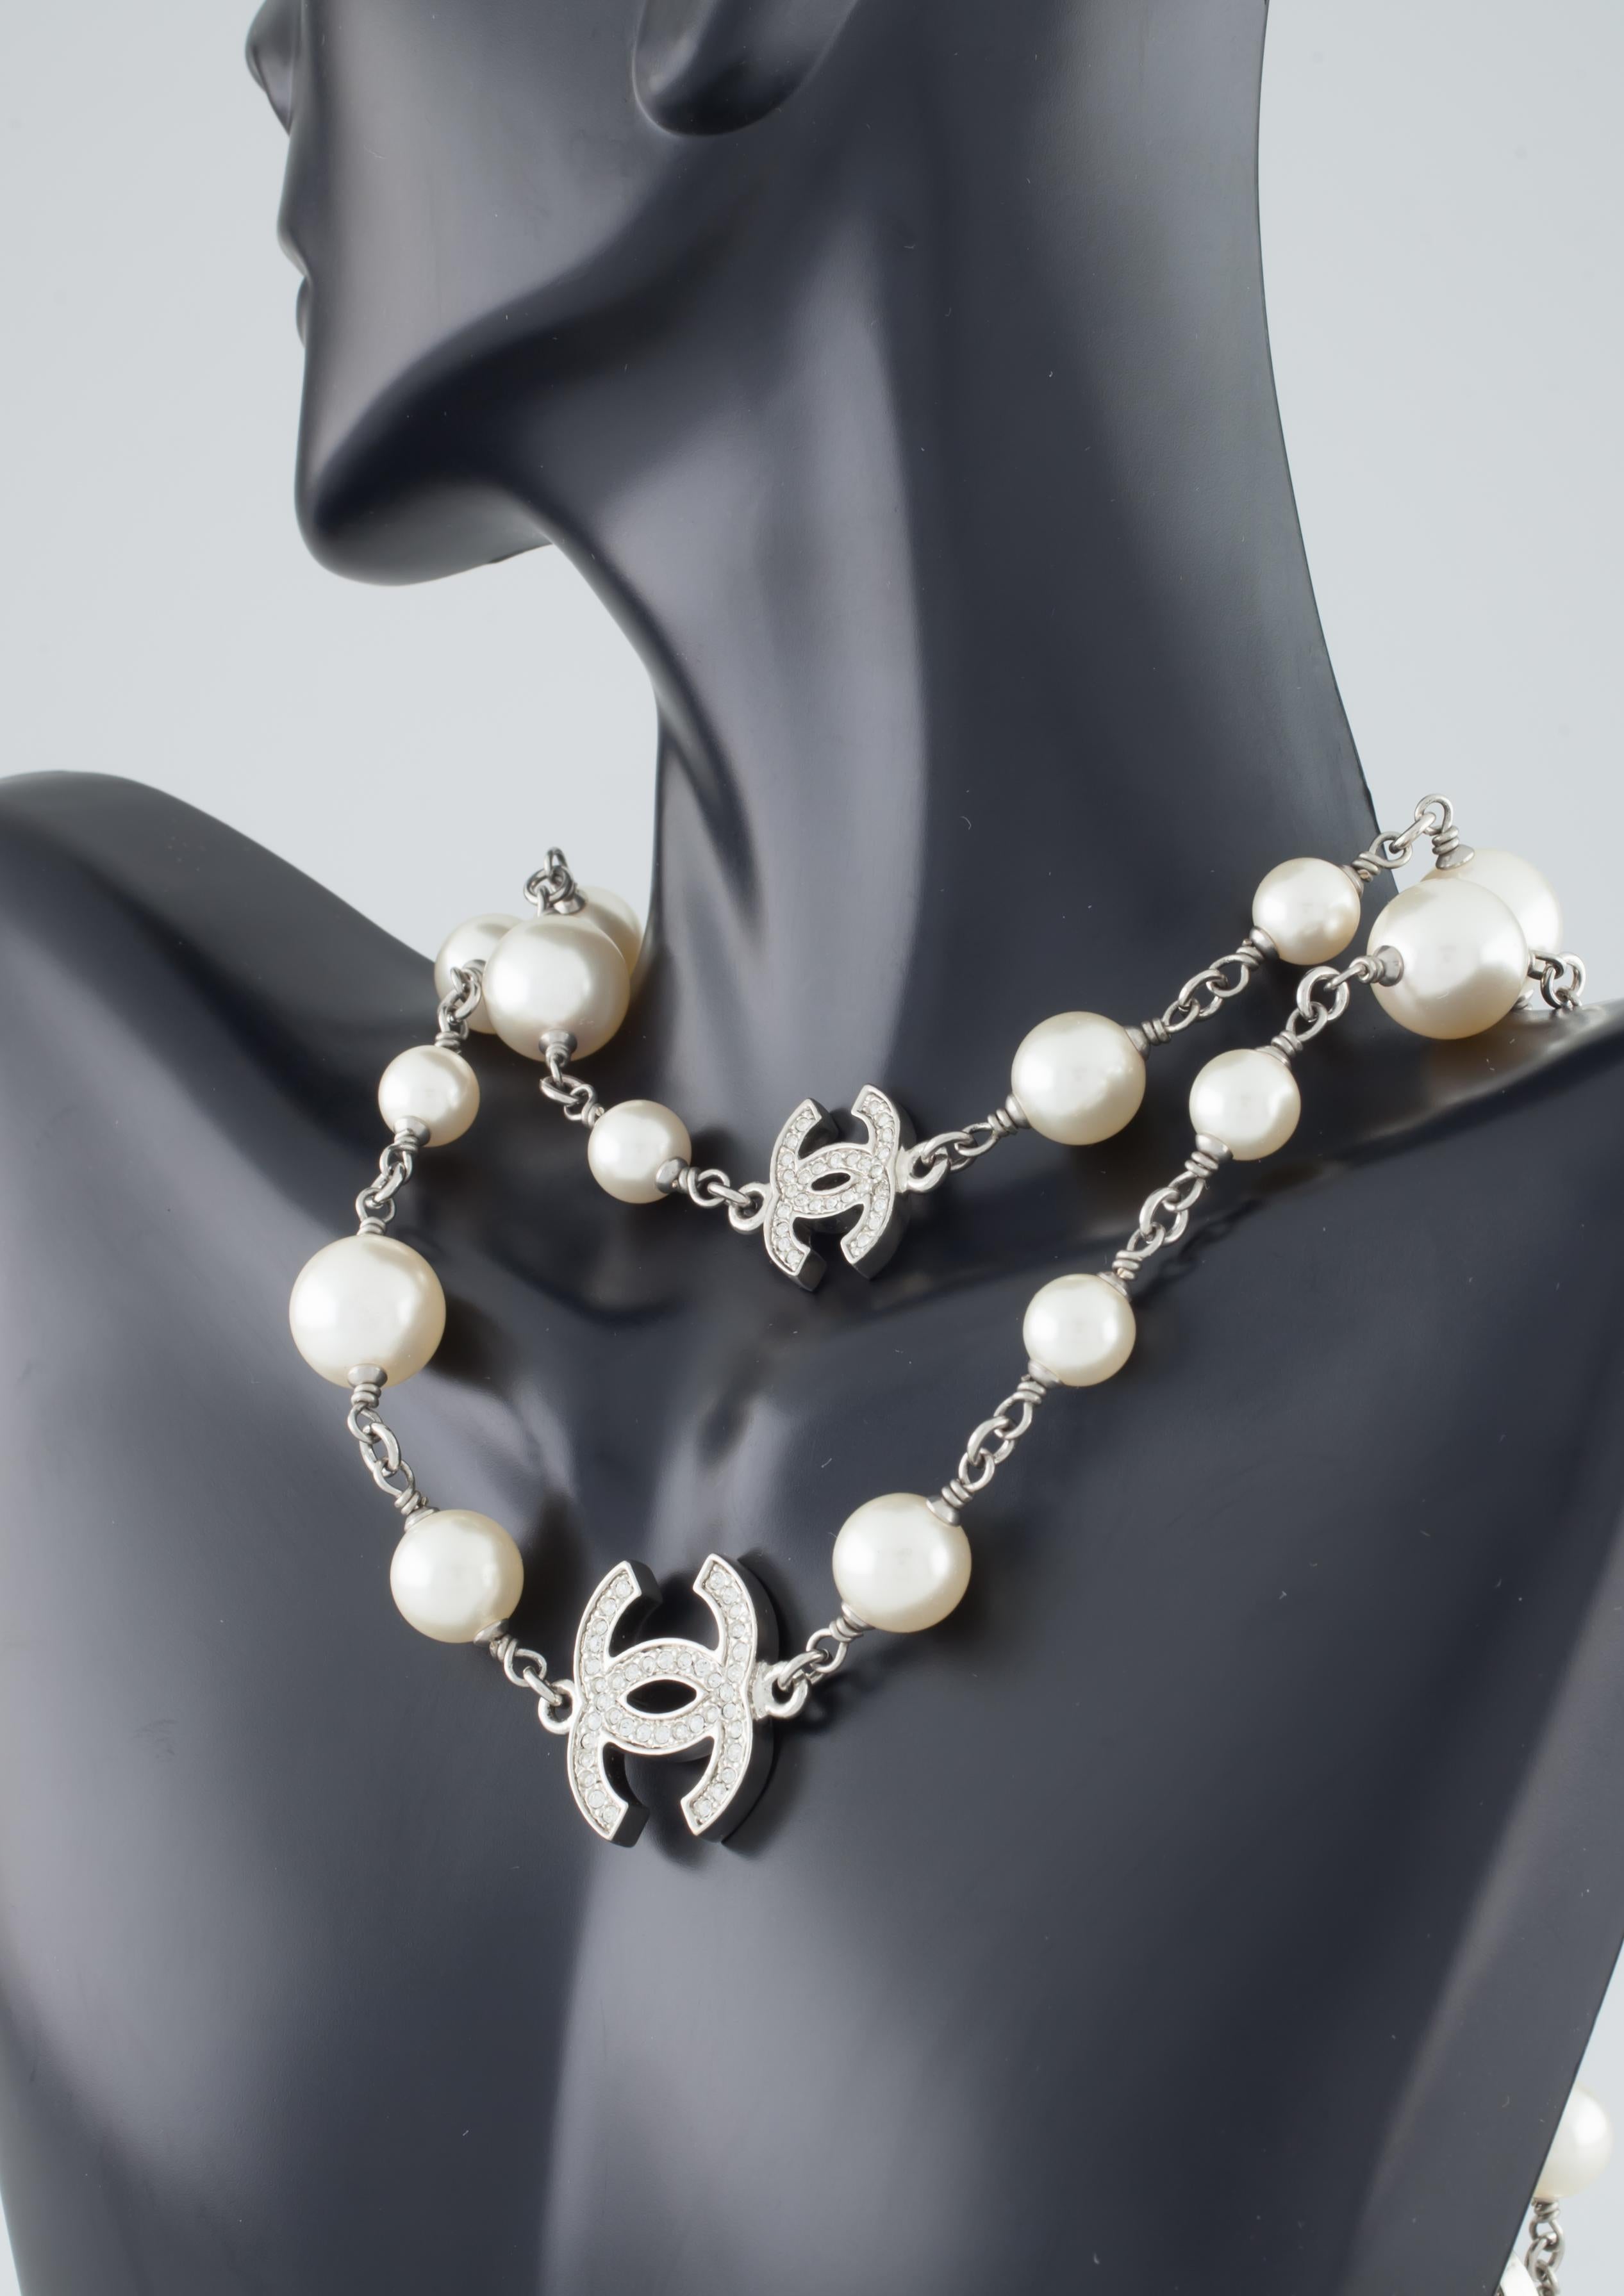 Gorgeous Pearl Necklace by Chanel
Features Various Sized Faux Pearls with 5 Crystal-Studded 